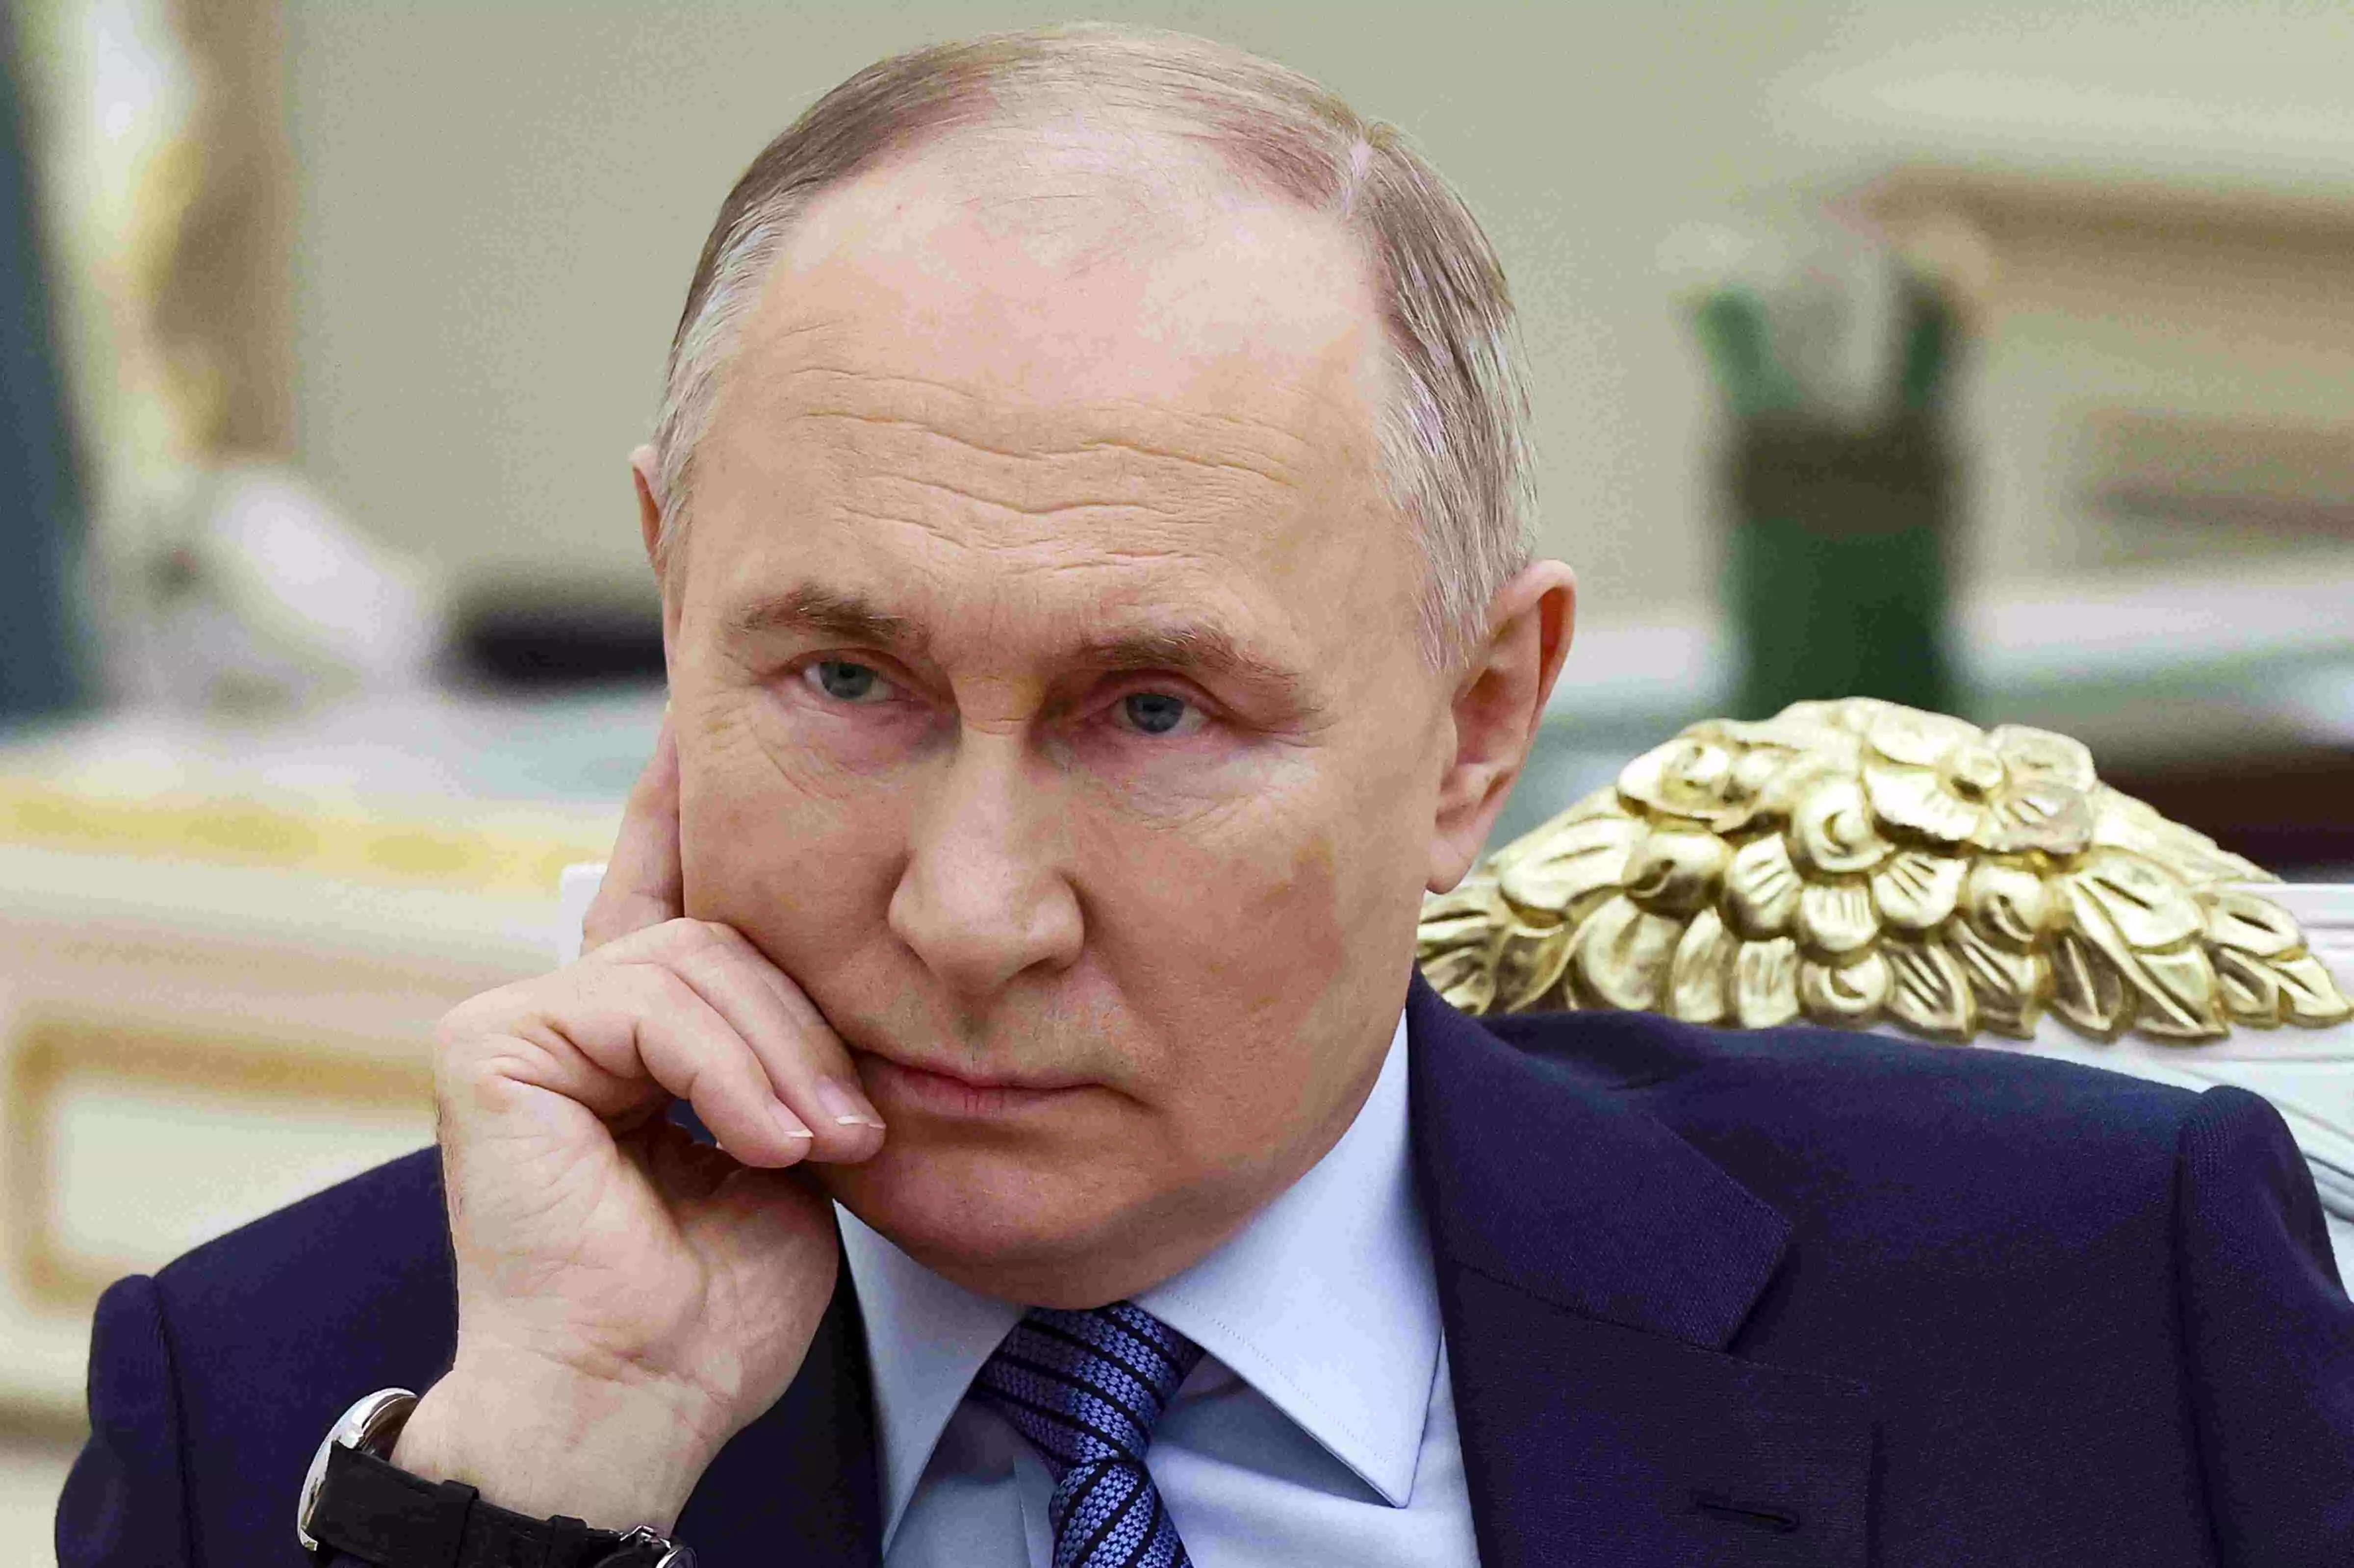 Putin poised to rule Russia for 6 more years after an election with no other real choices